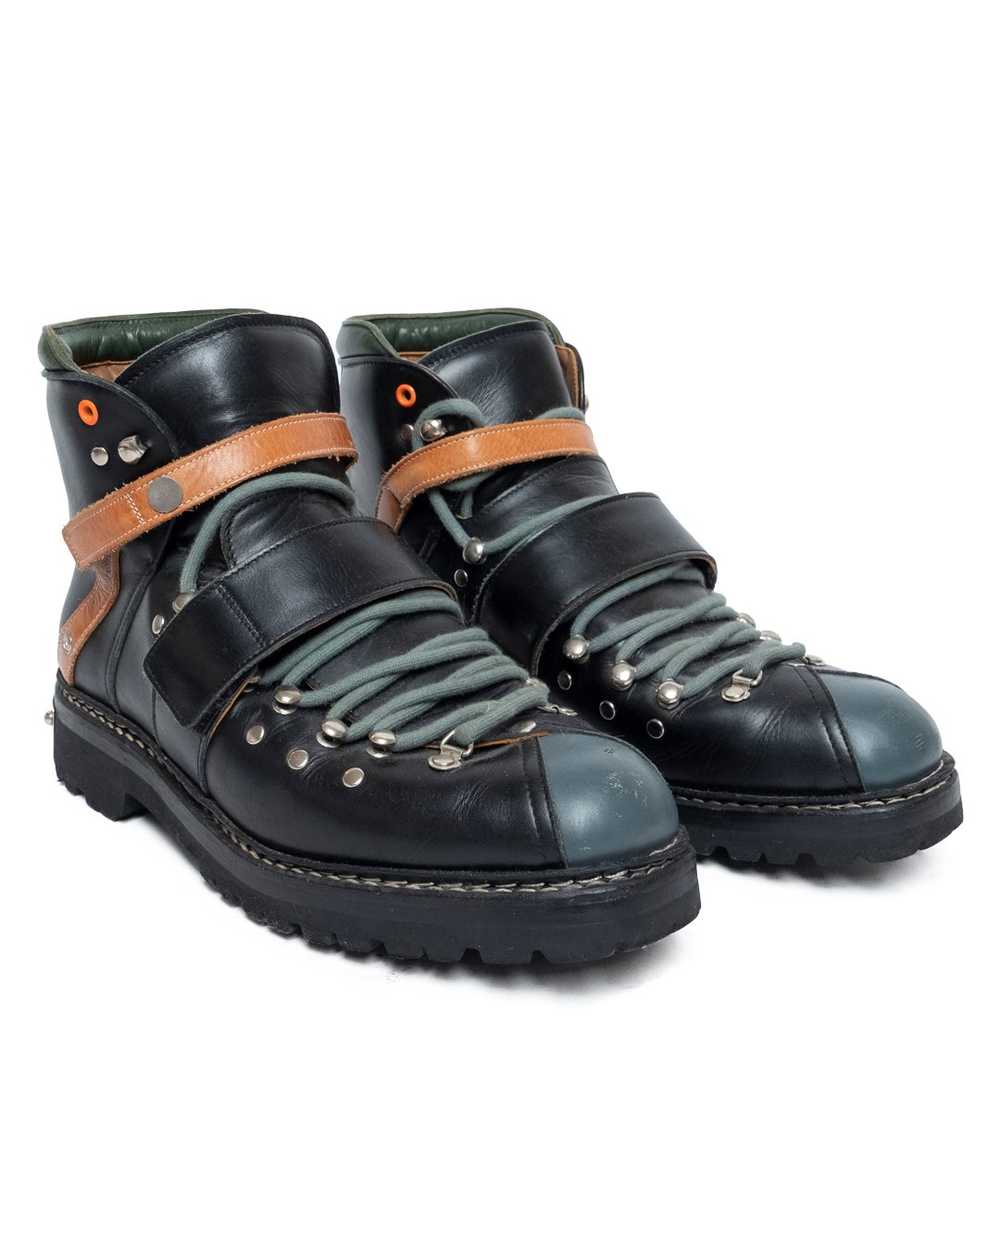 Undercover SS2010 "Less But Better" Hiking Boots - image 1